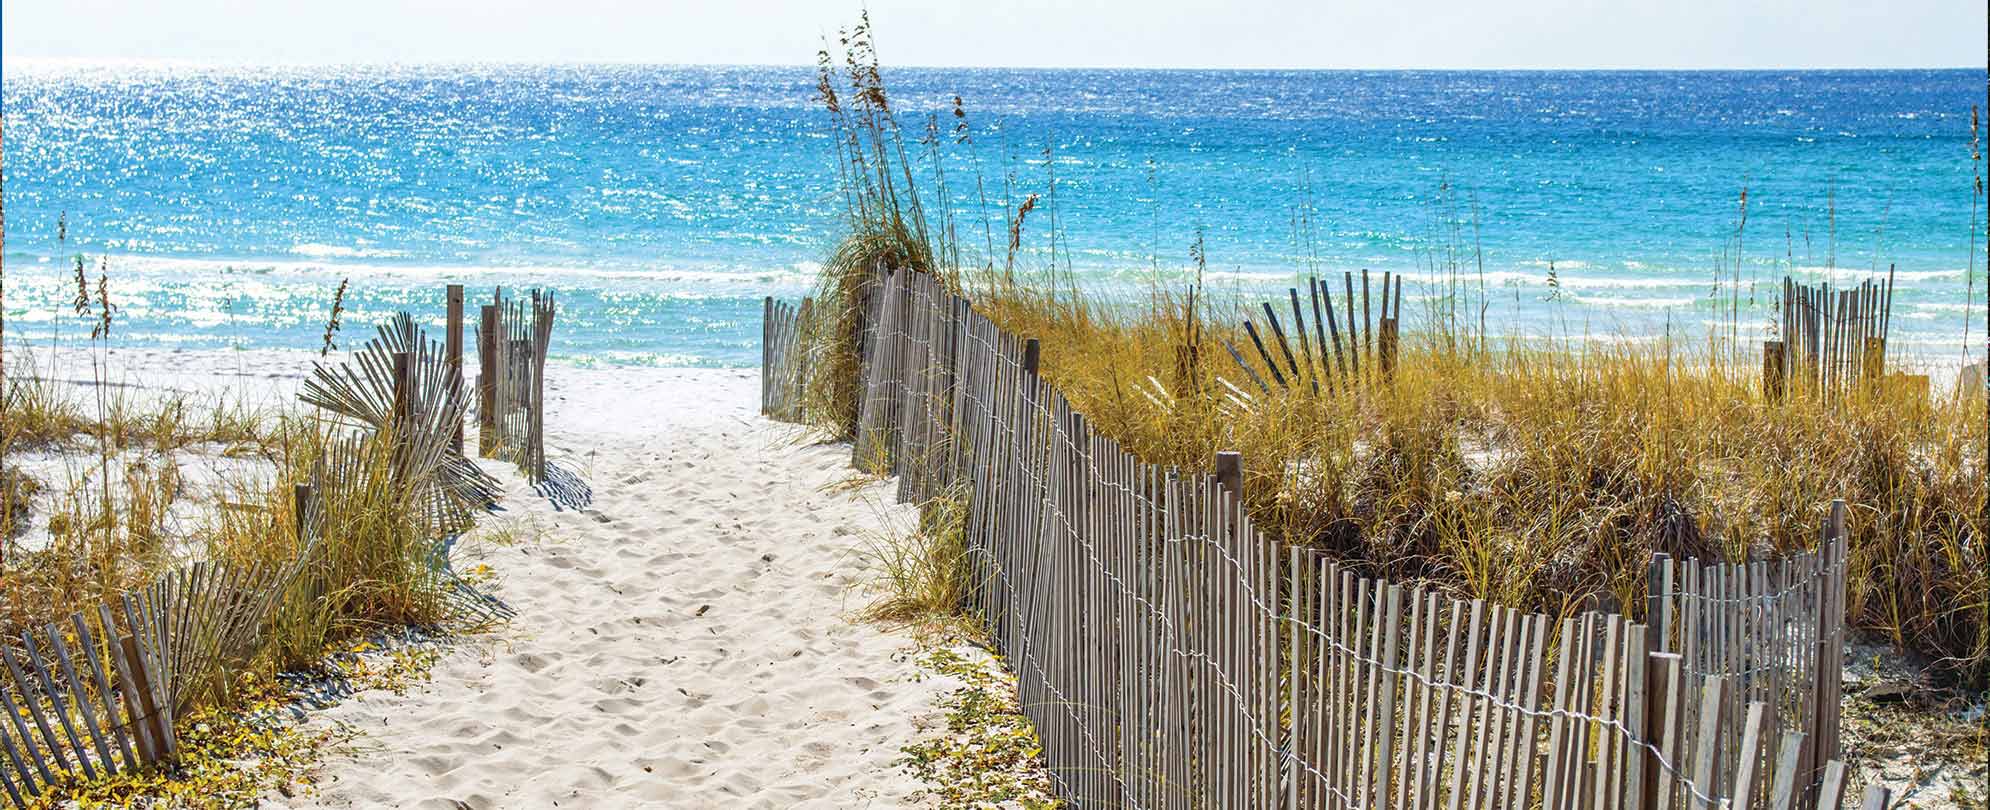 A white-sand beach part of Gulf Islands National Seashore, stretching over the coastal barrier islands of Florida and Mississippi